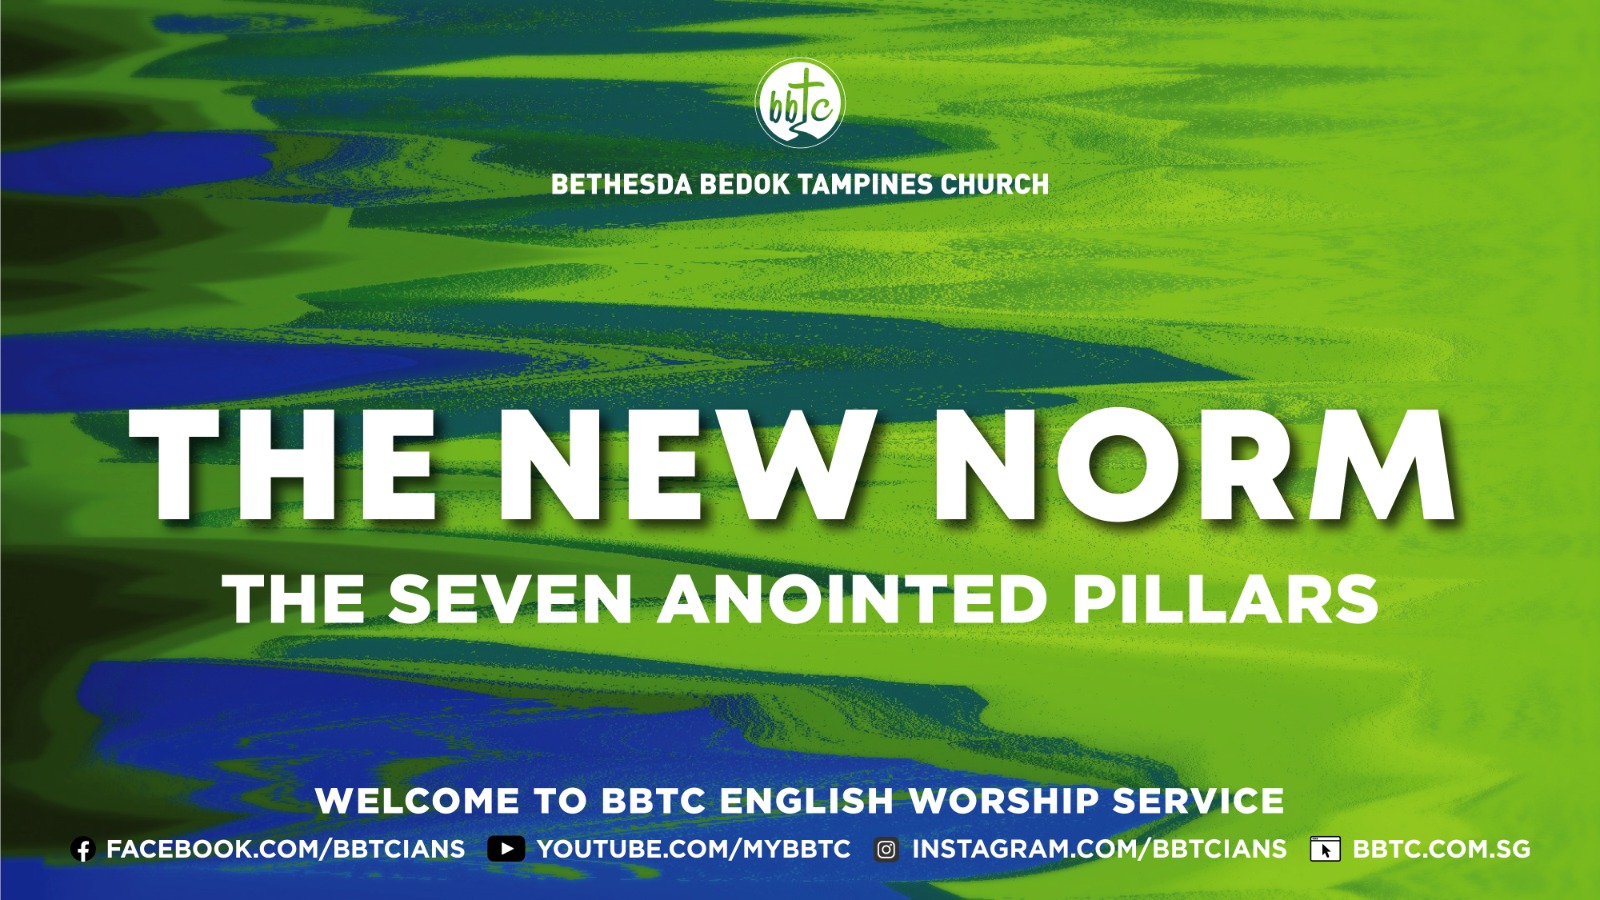 The New Norm: The Seven Anointed Pillars